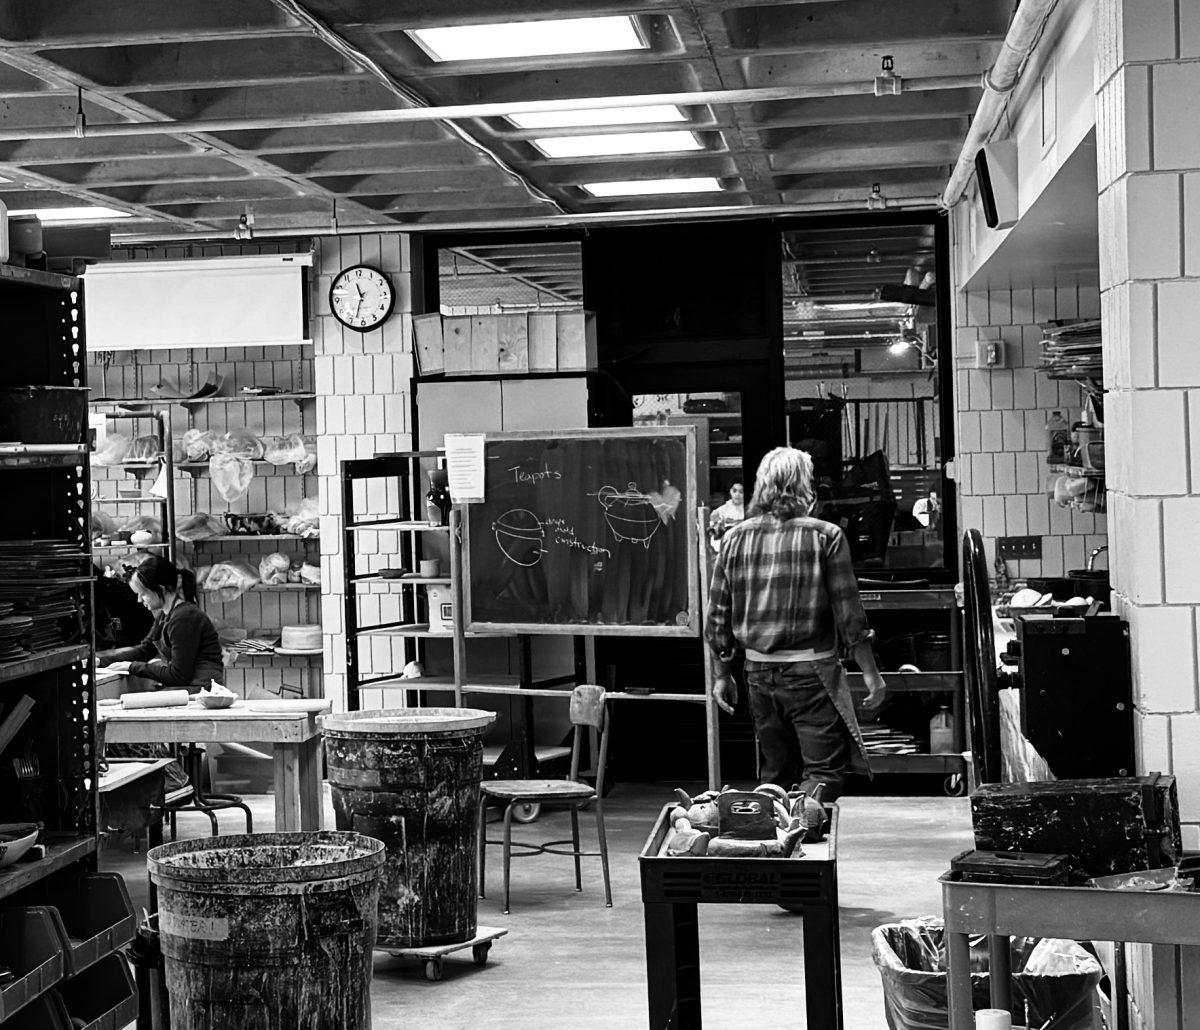 IN THE STUDIO. A picture taken mid ceramics class, showing the action happening during class.